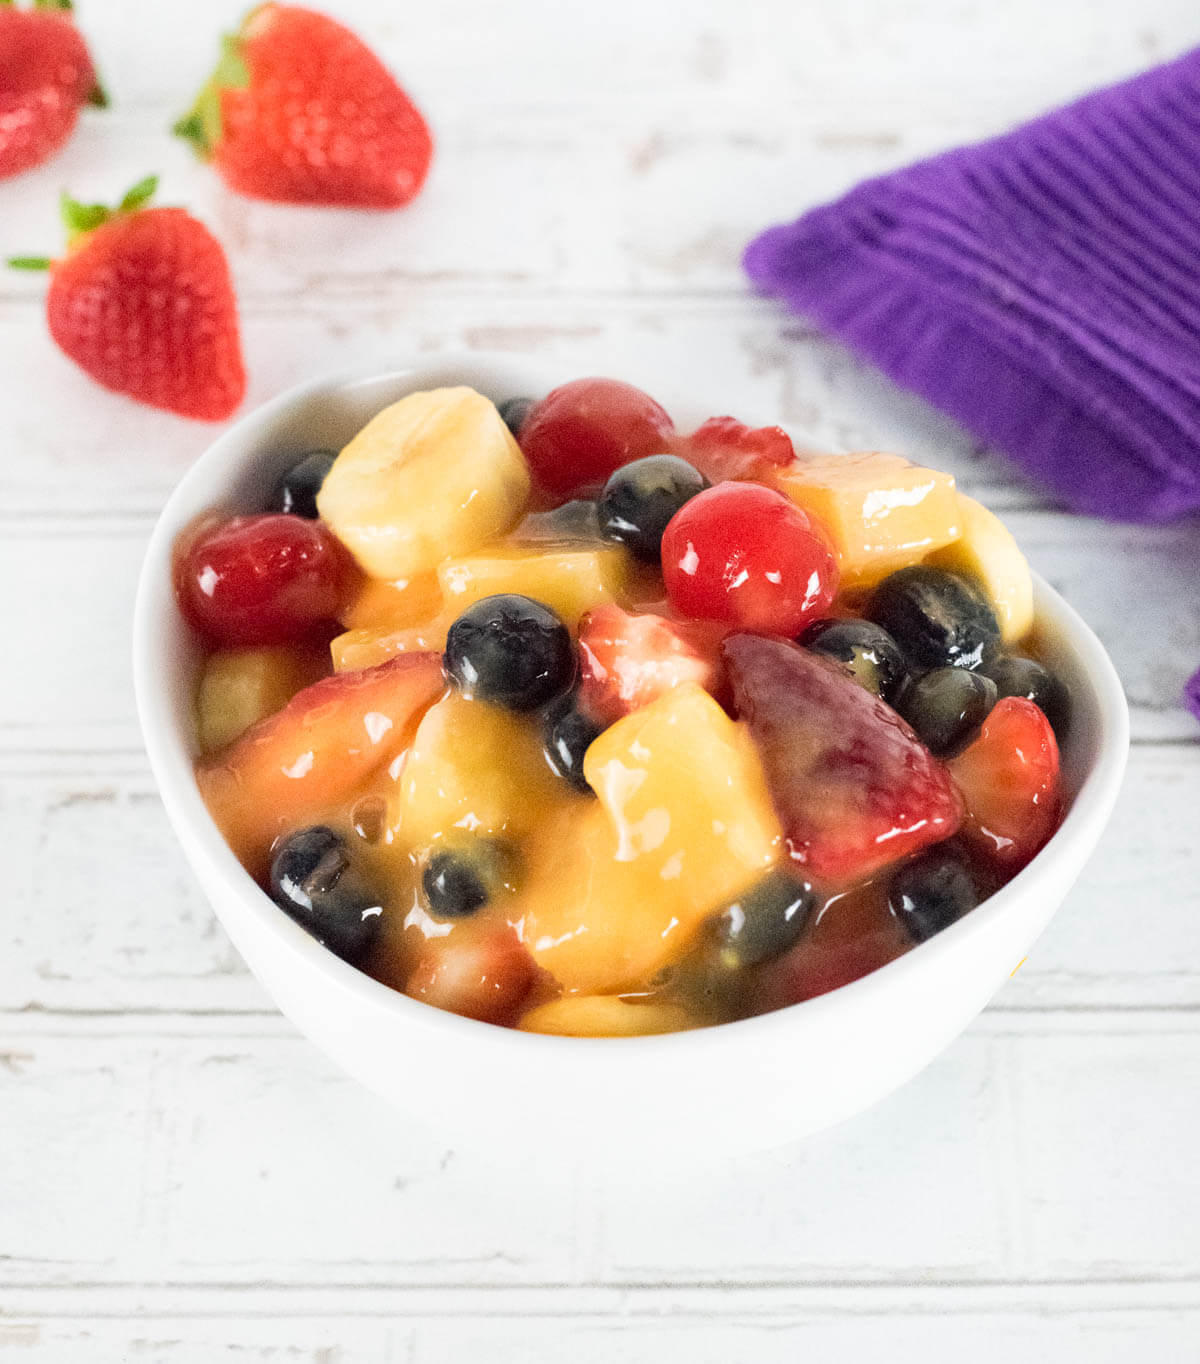 Fruit salad with pudding